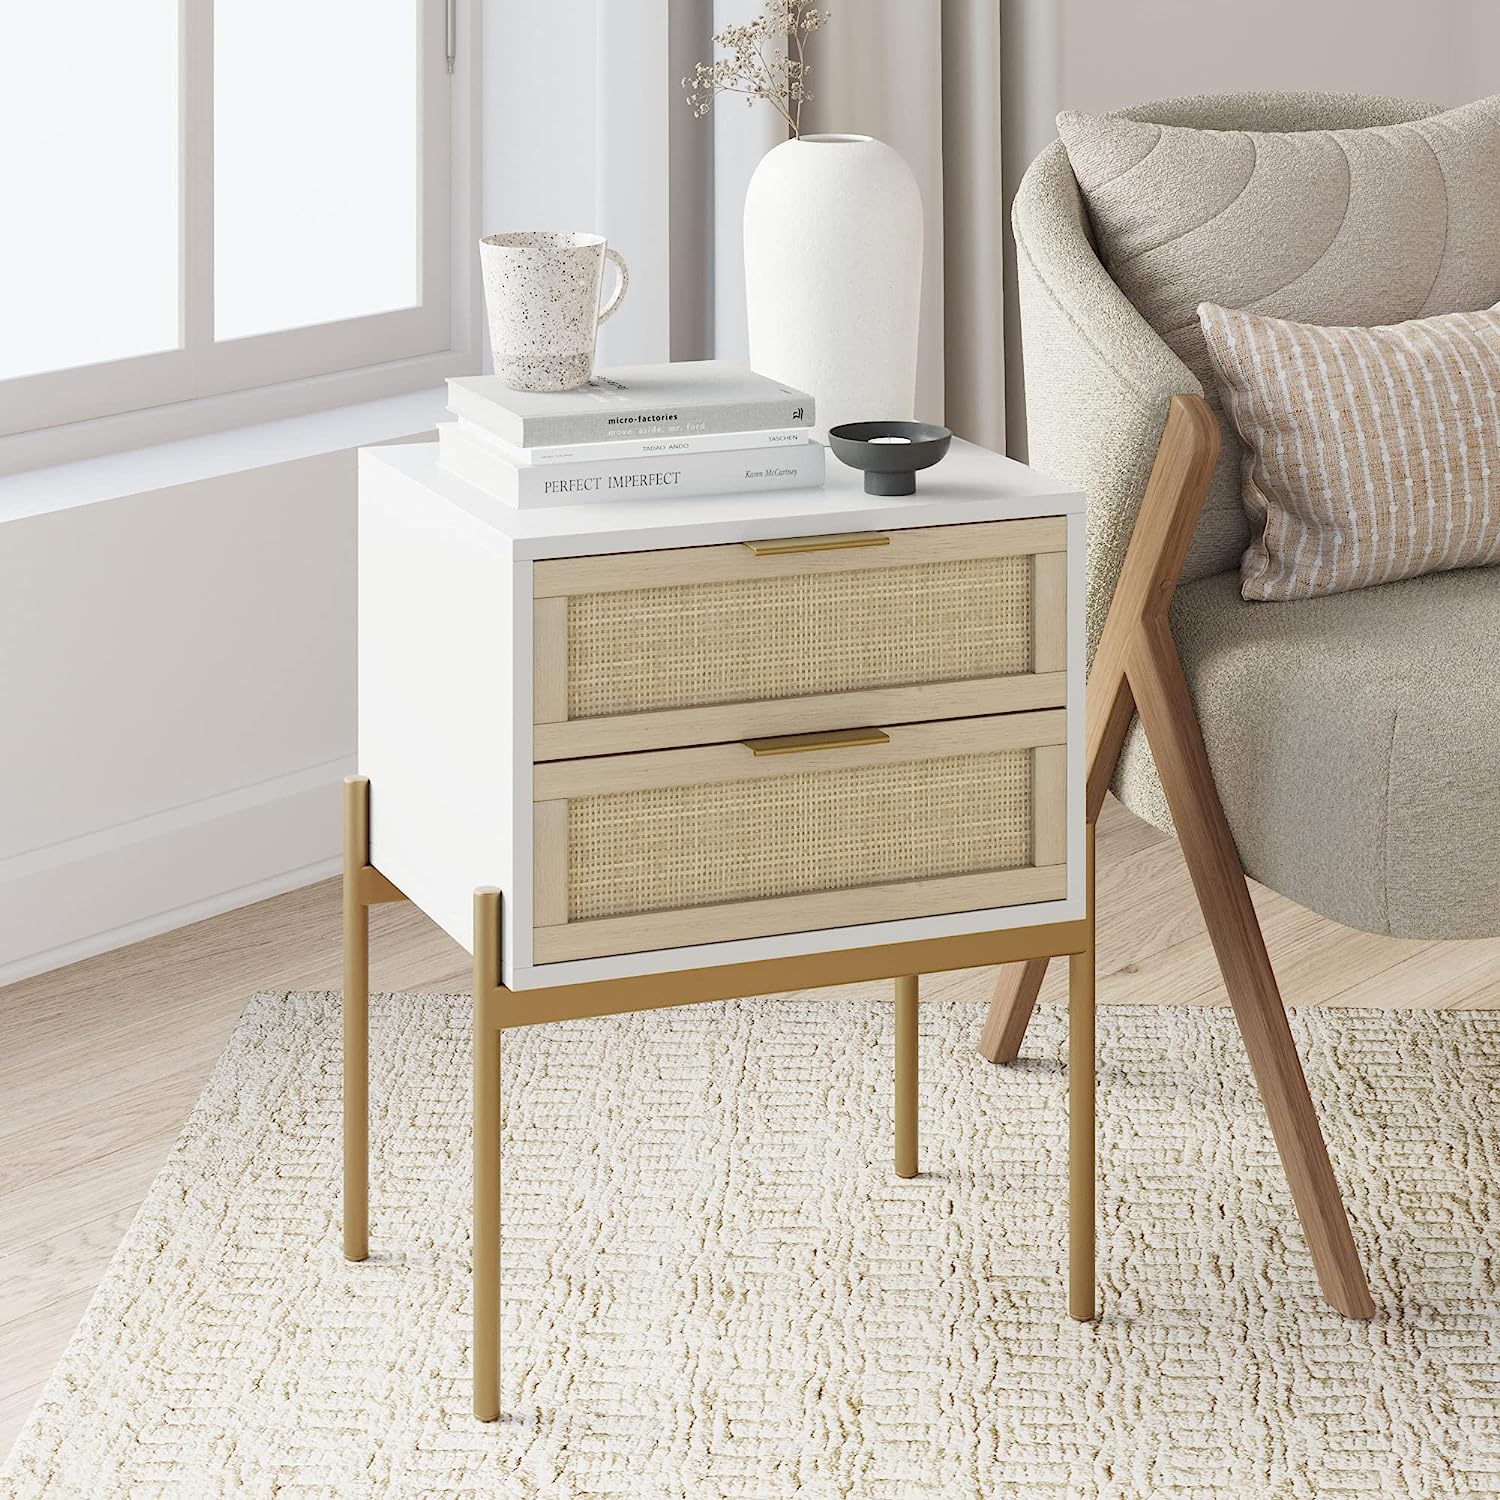 gold and white living room end tables with drawers and woven rattan cane details cute bohemian chic furniture for sale cheap on amazon glam decor inspiration storage ideas